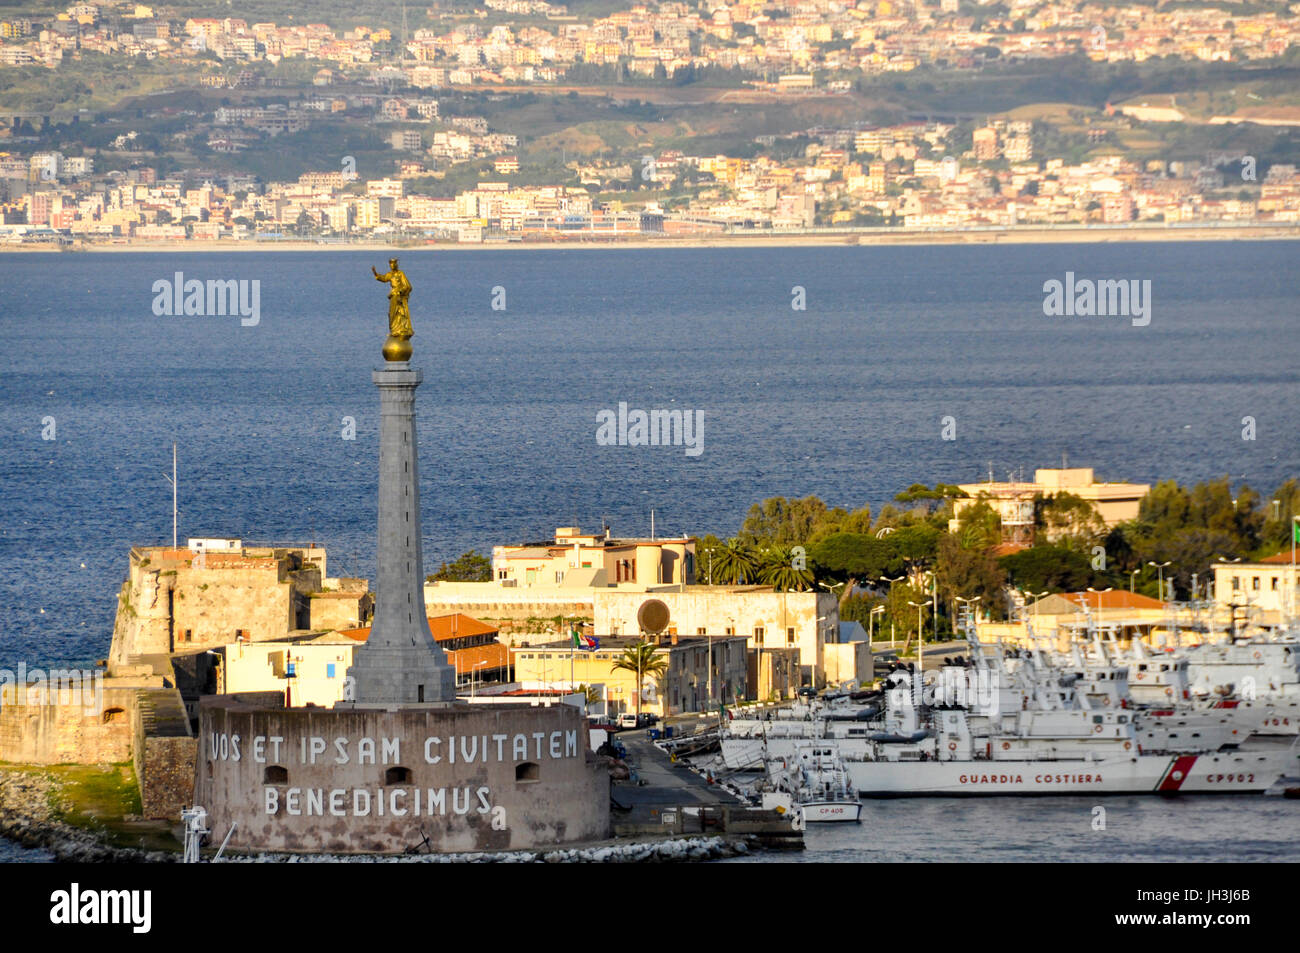 The Strait of Messina with Calabria in the background and the port of Messina in the foreground, Sicily, Italy. Stock Photo